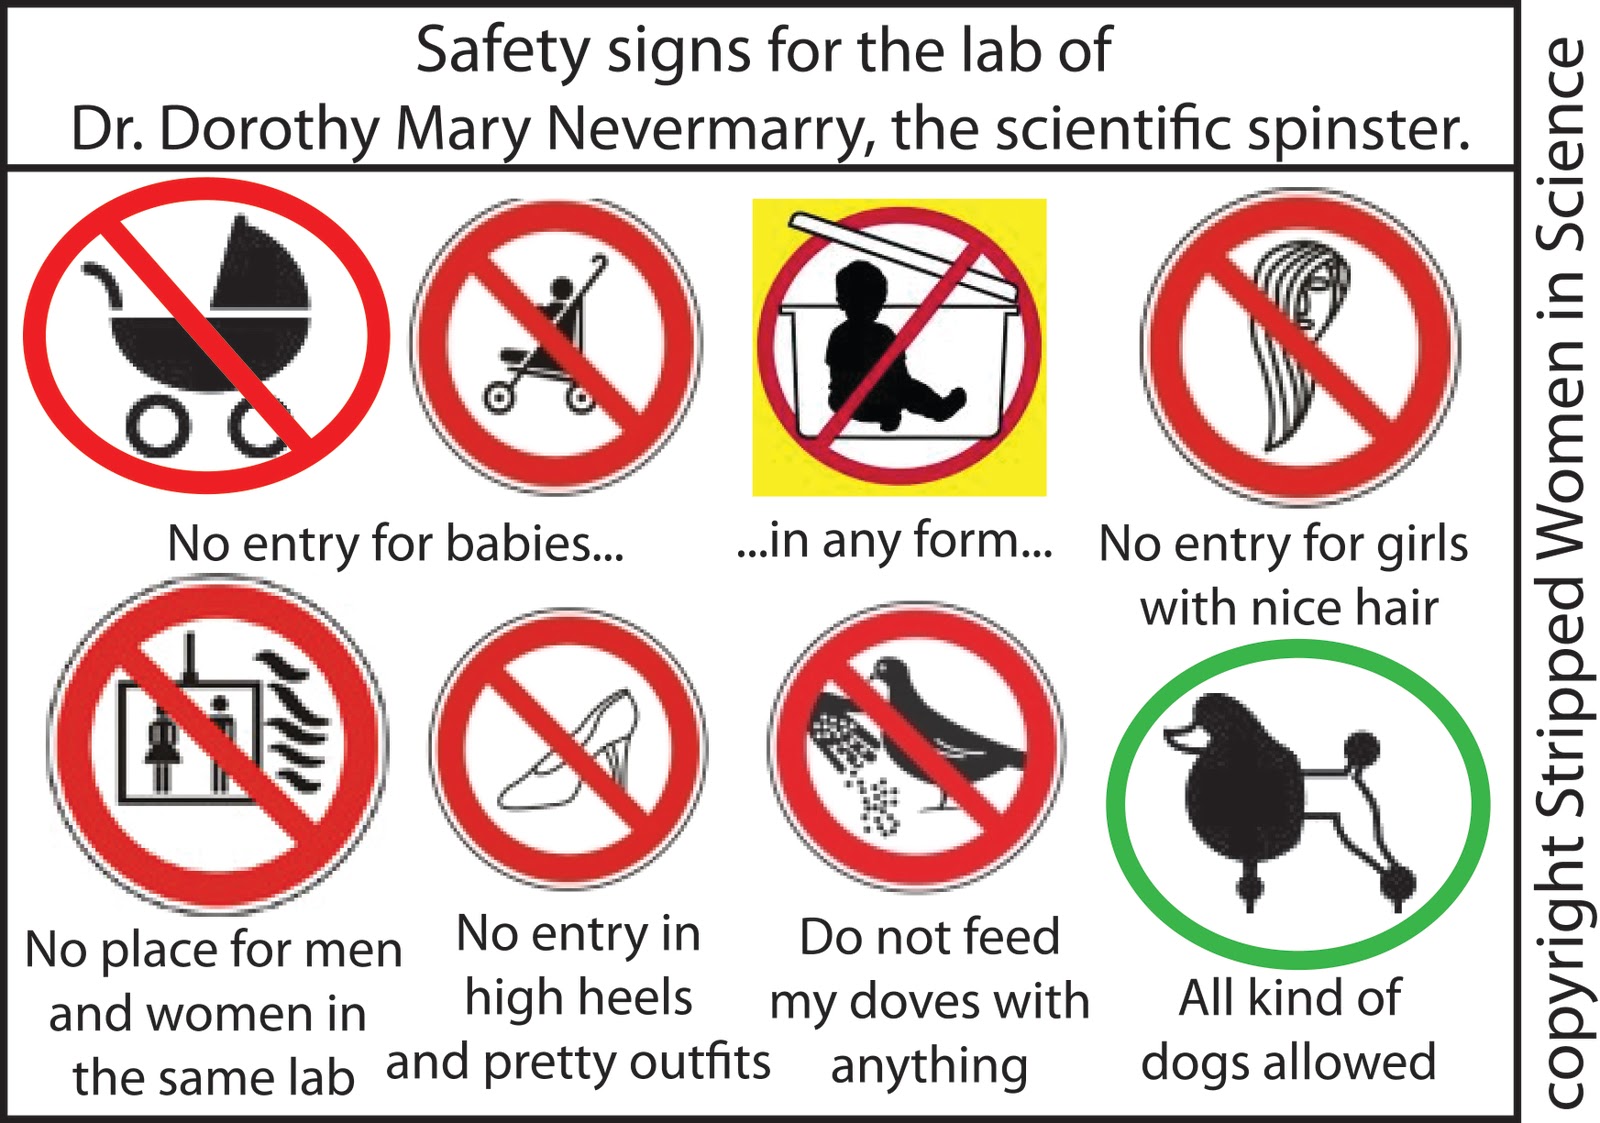 Stripped Women in Science: Safety signs for scientific spinsters